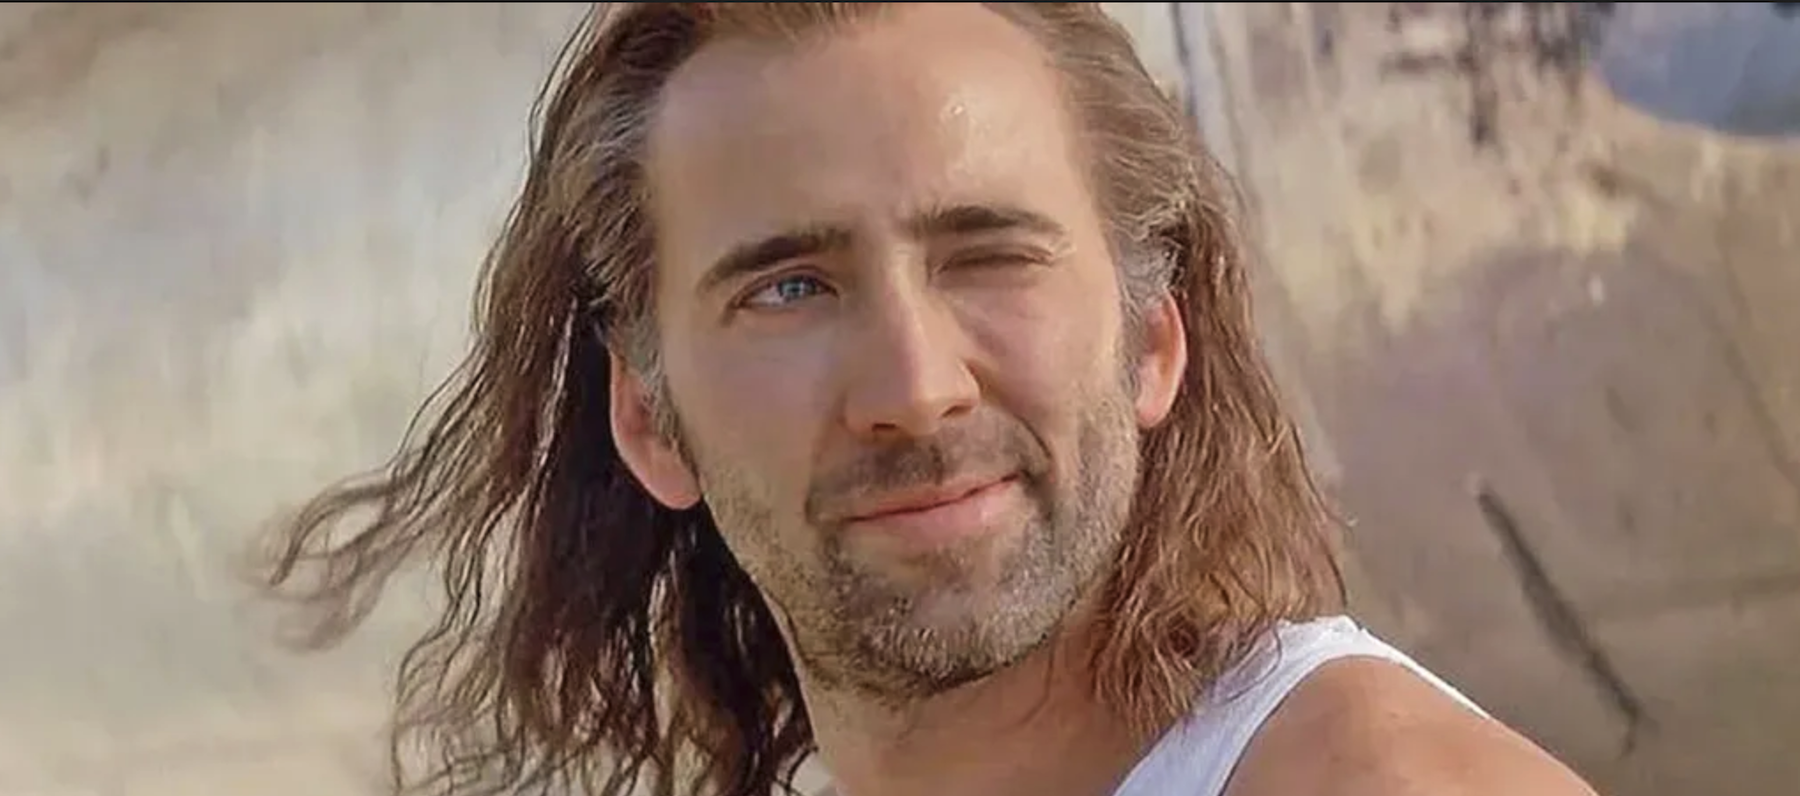 Still frame from the movie Con Air with Nicolas Cage winking at the camera.